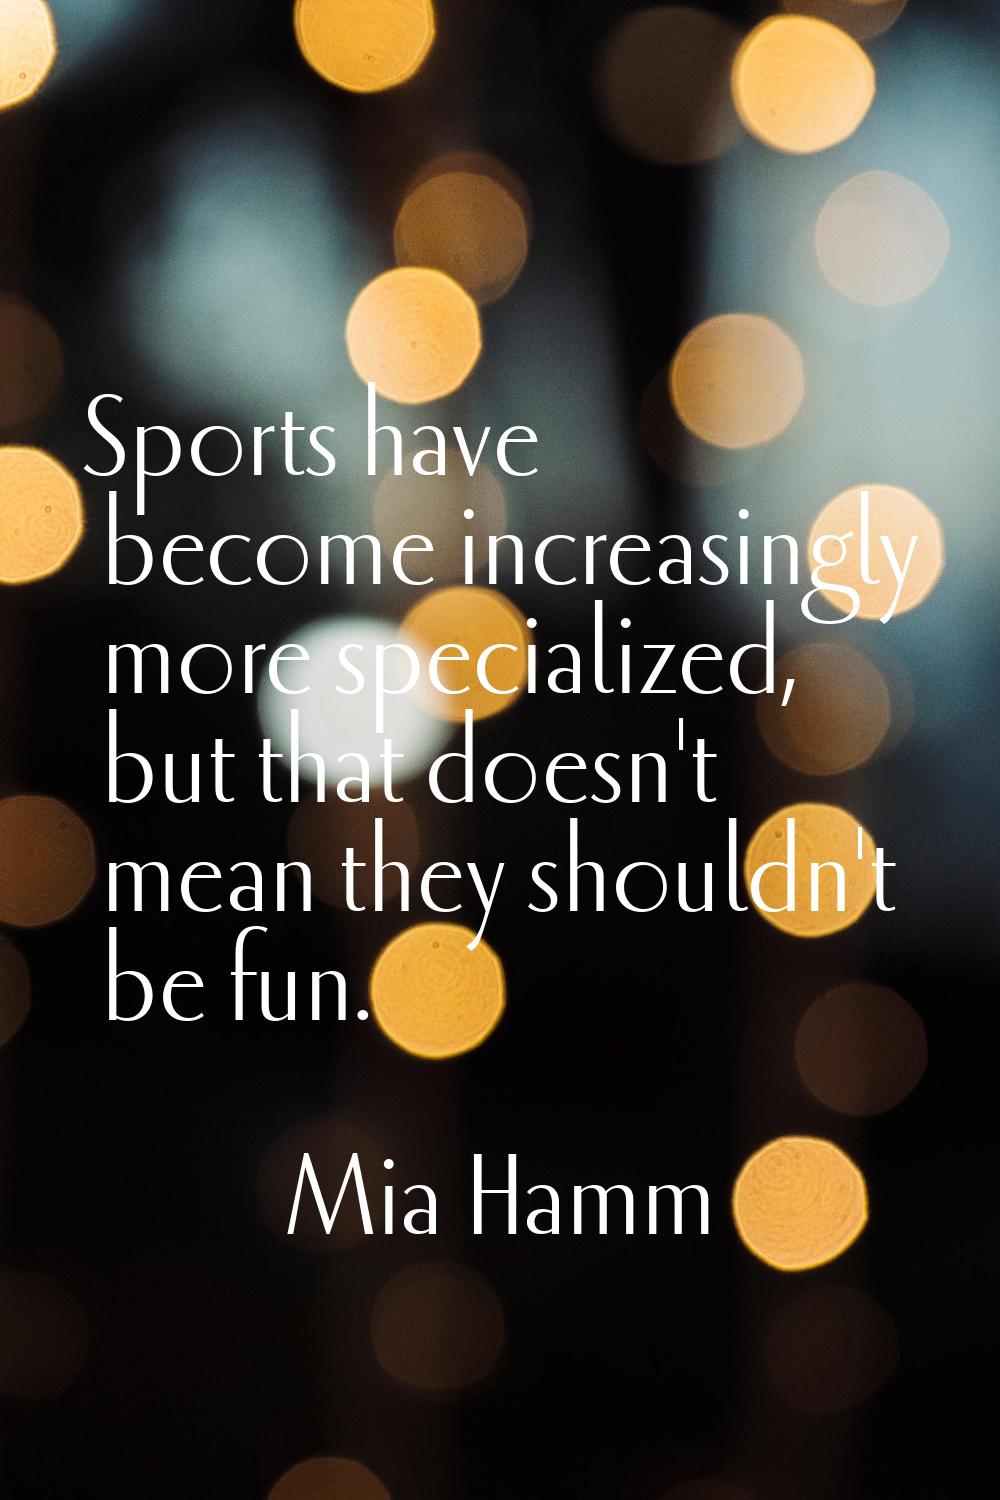 Sports have become increasingly more specialized, but that doesn't mean they shouldn't be fun.